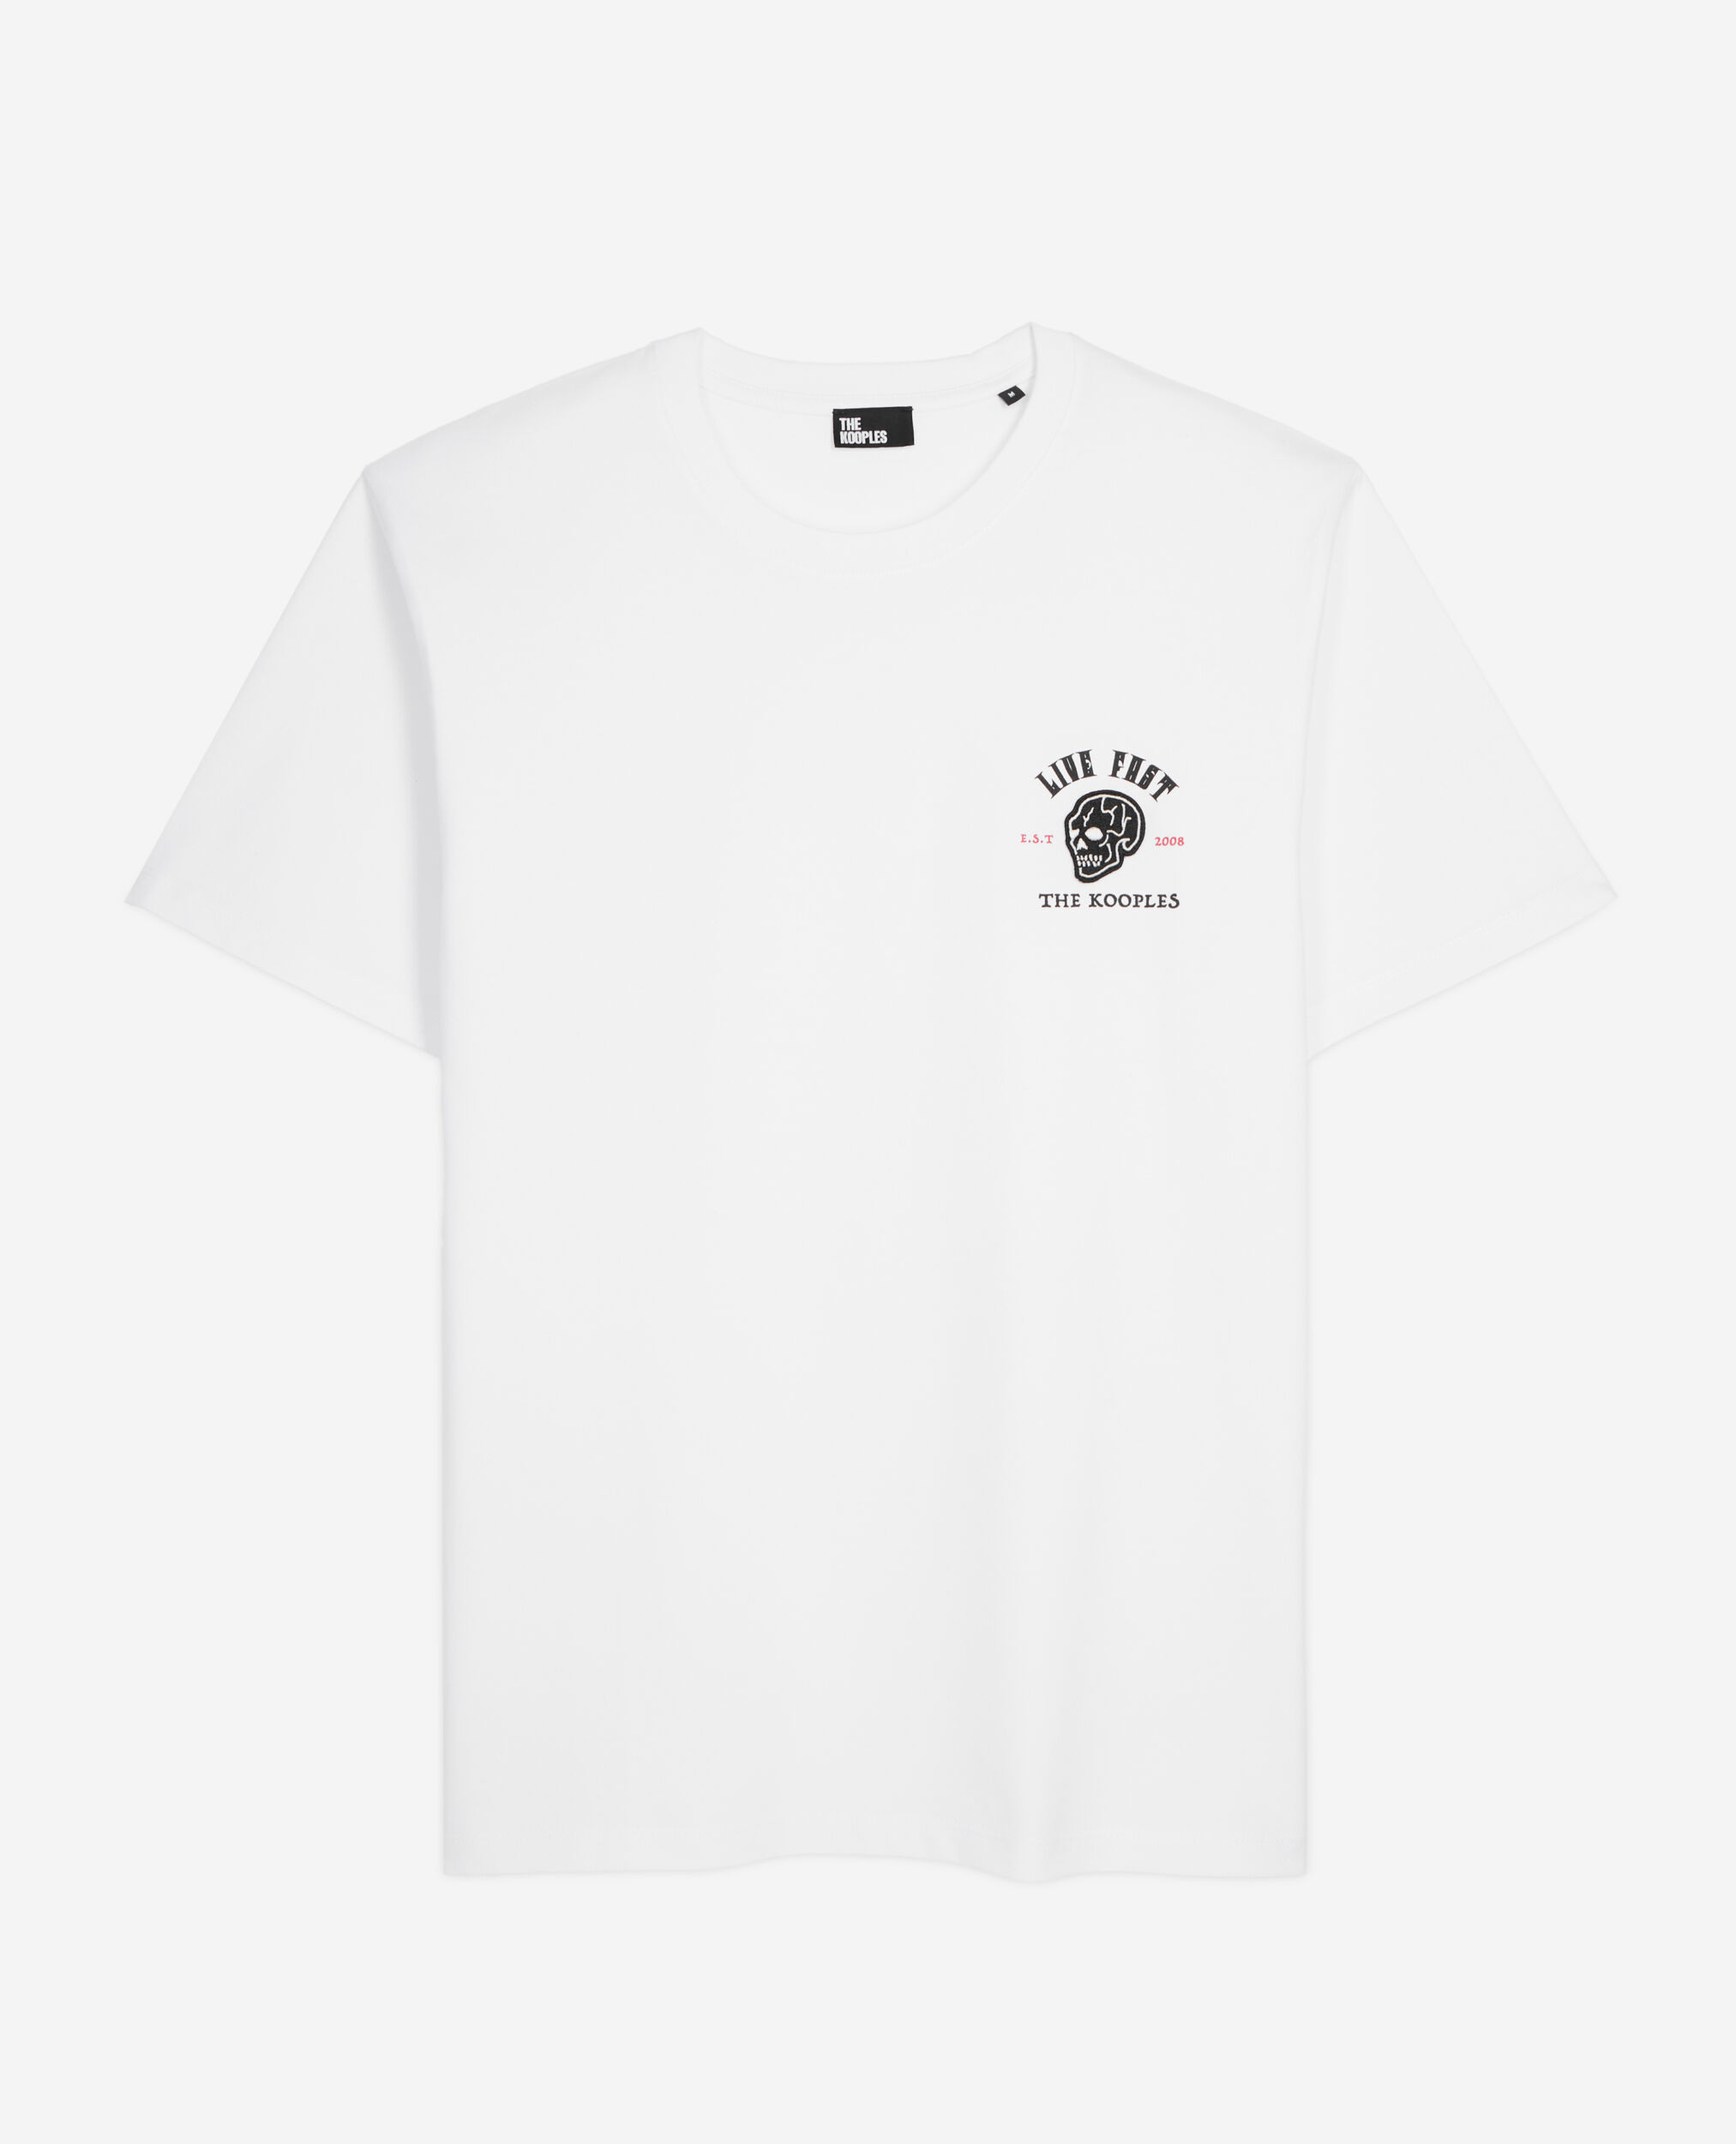 White Live fast t-shirt, WHITE, hi-res image number null